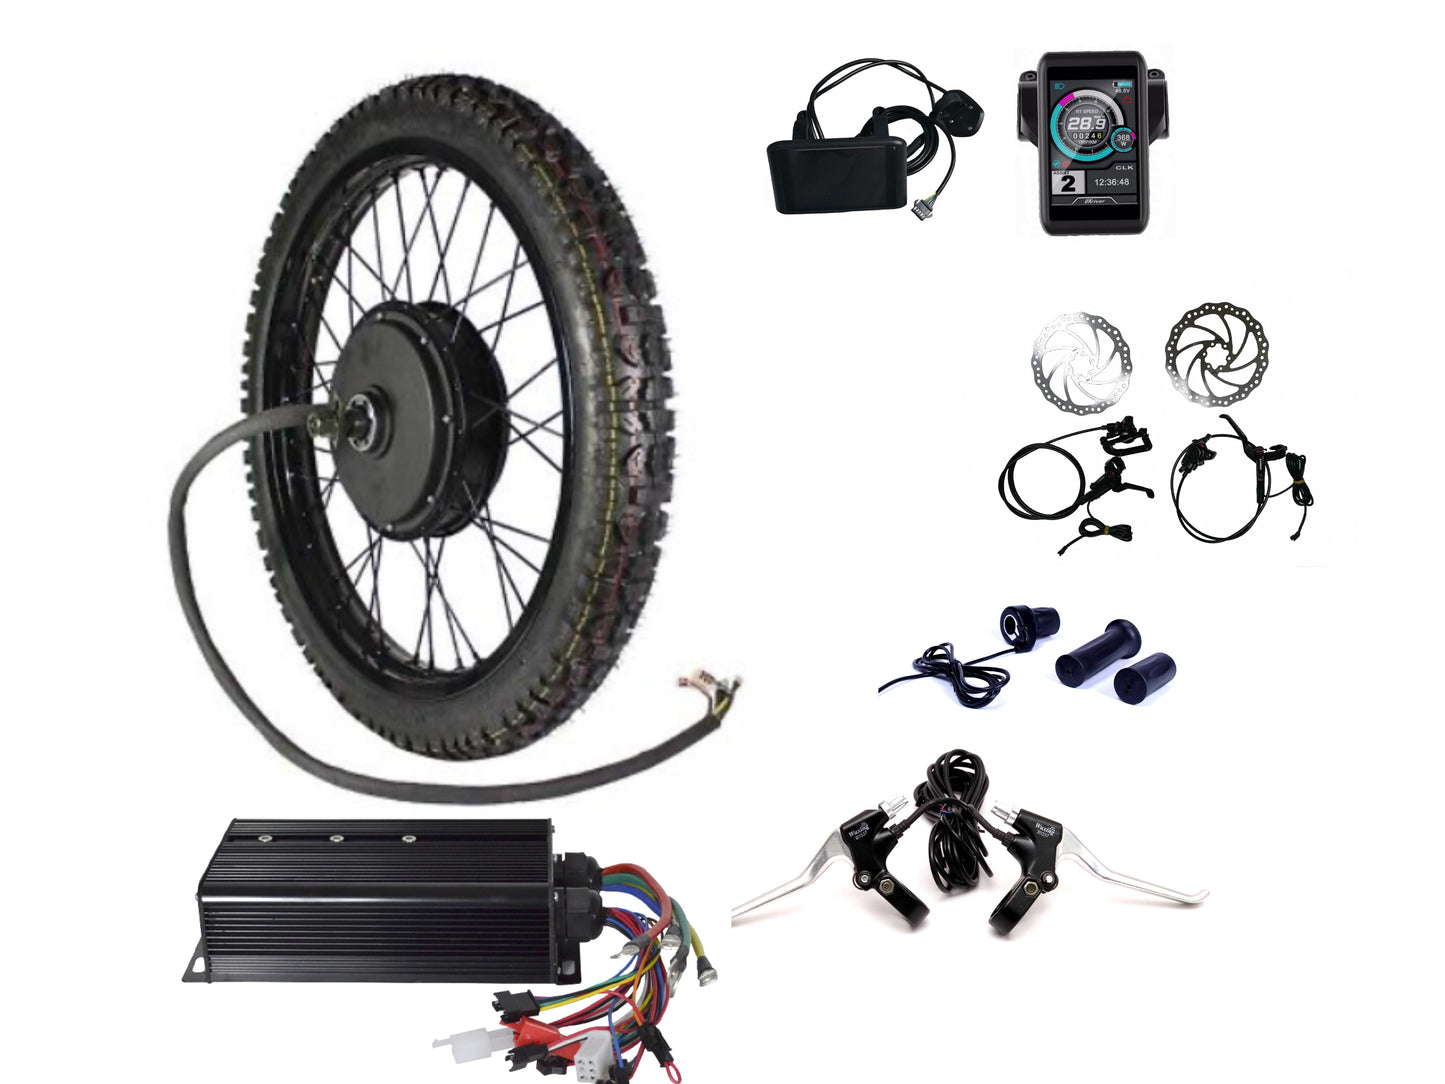 72V5000W Rear Wheel Electric Bike Hub Motor Conversion kit 80A Controller with TFT Display